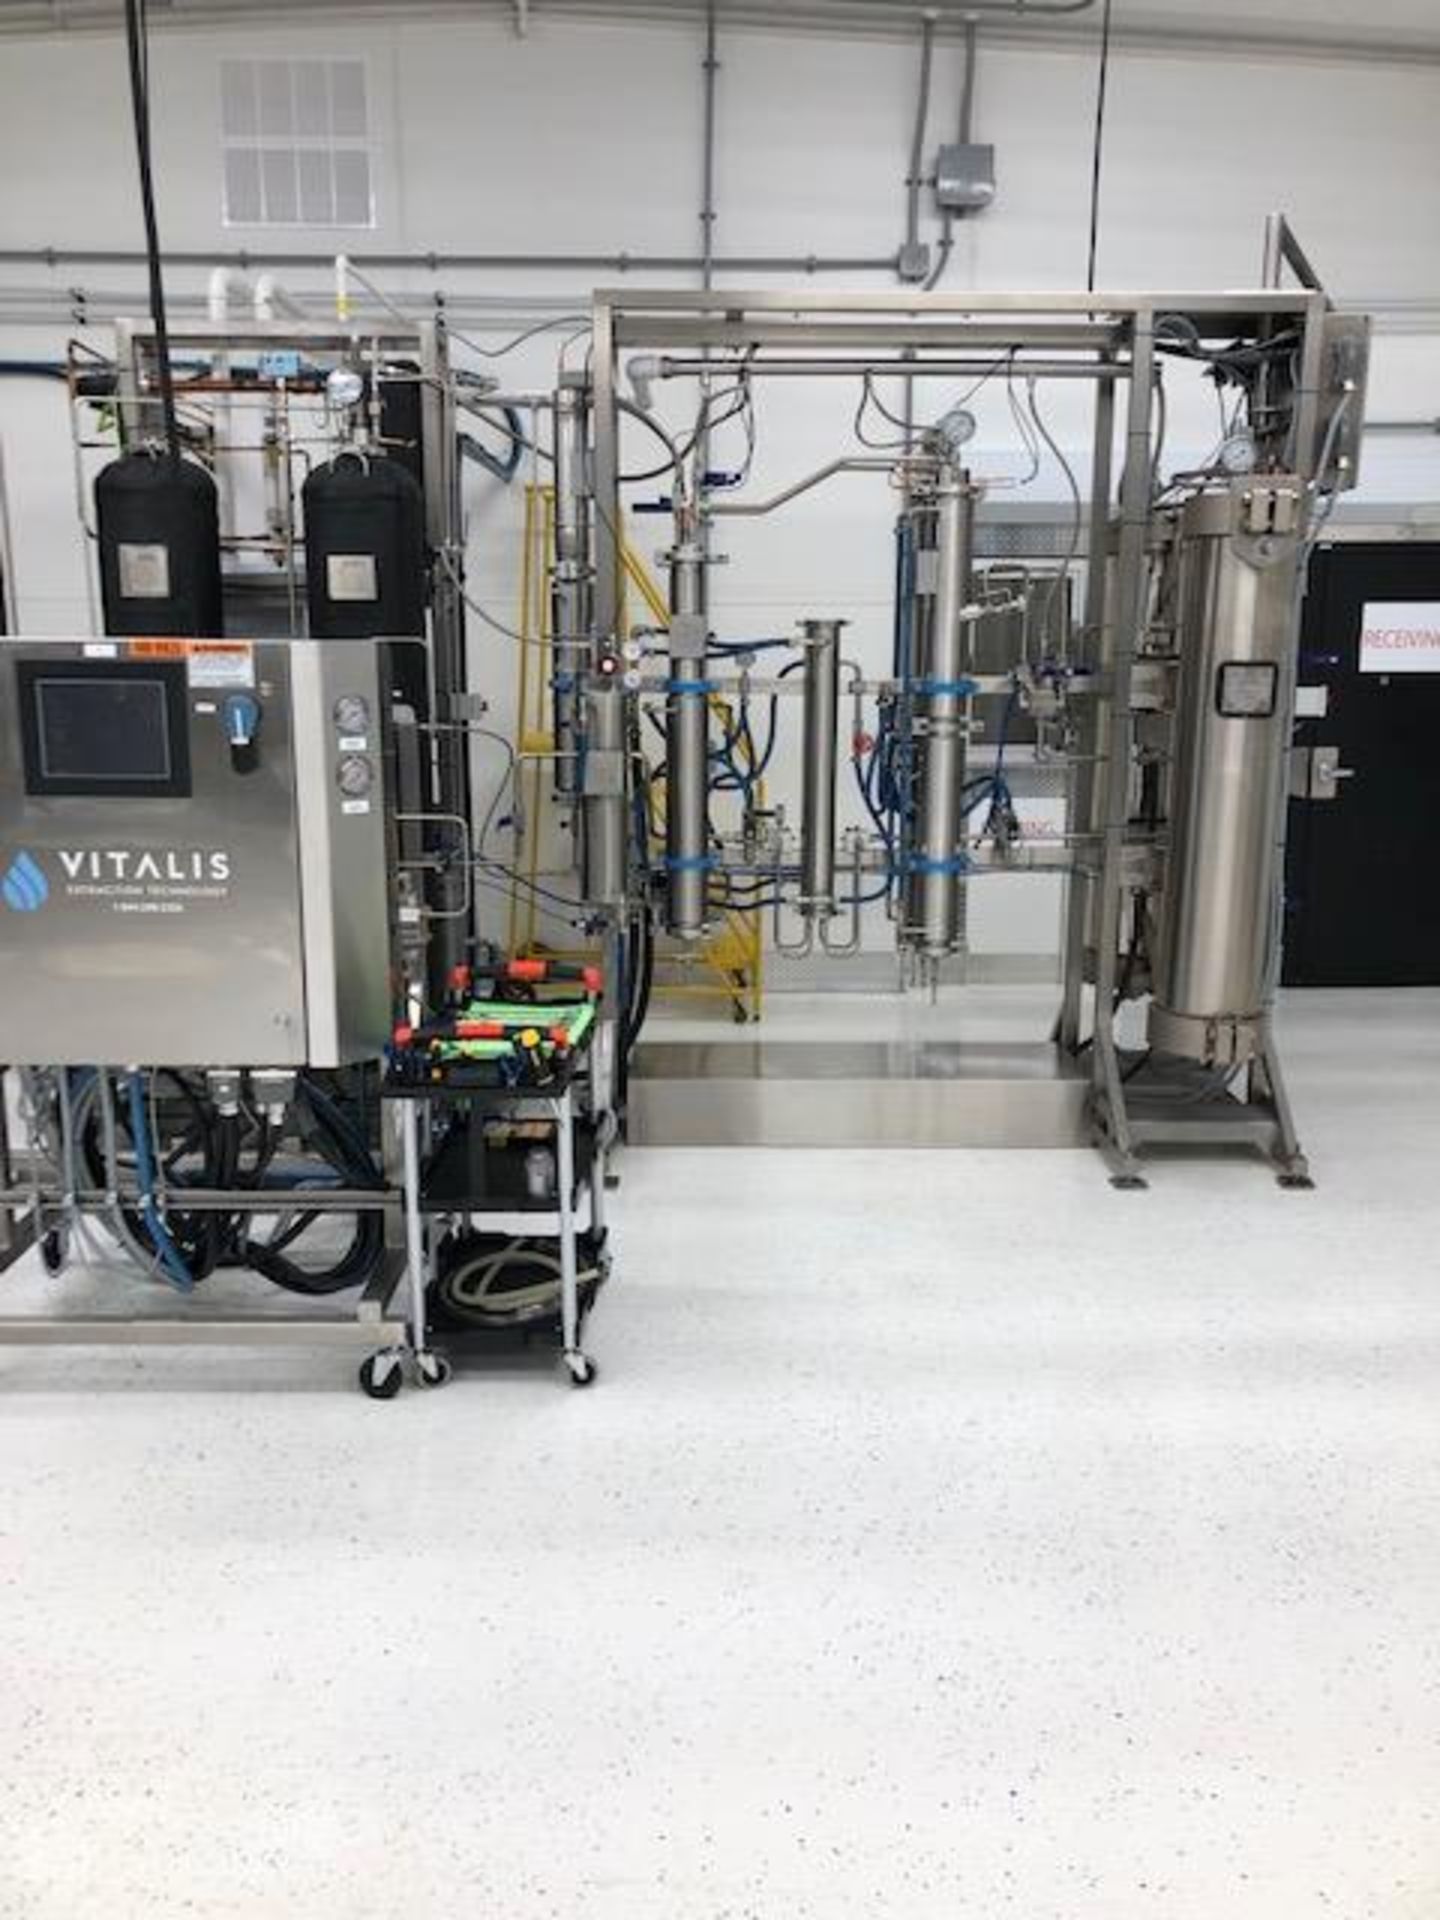 Used Vitalis 180 L Q Series Extraction System.3000 psig. Model Q180S. - Image 2 of 2